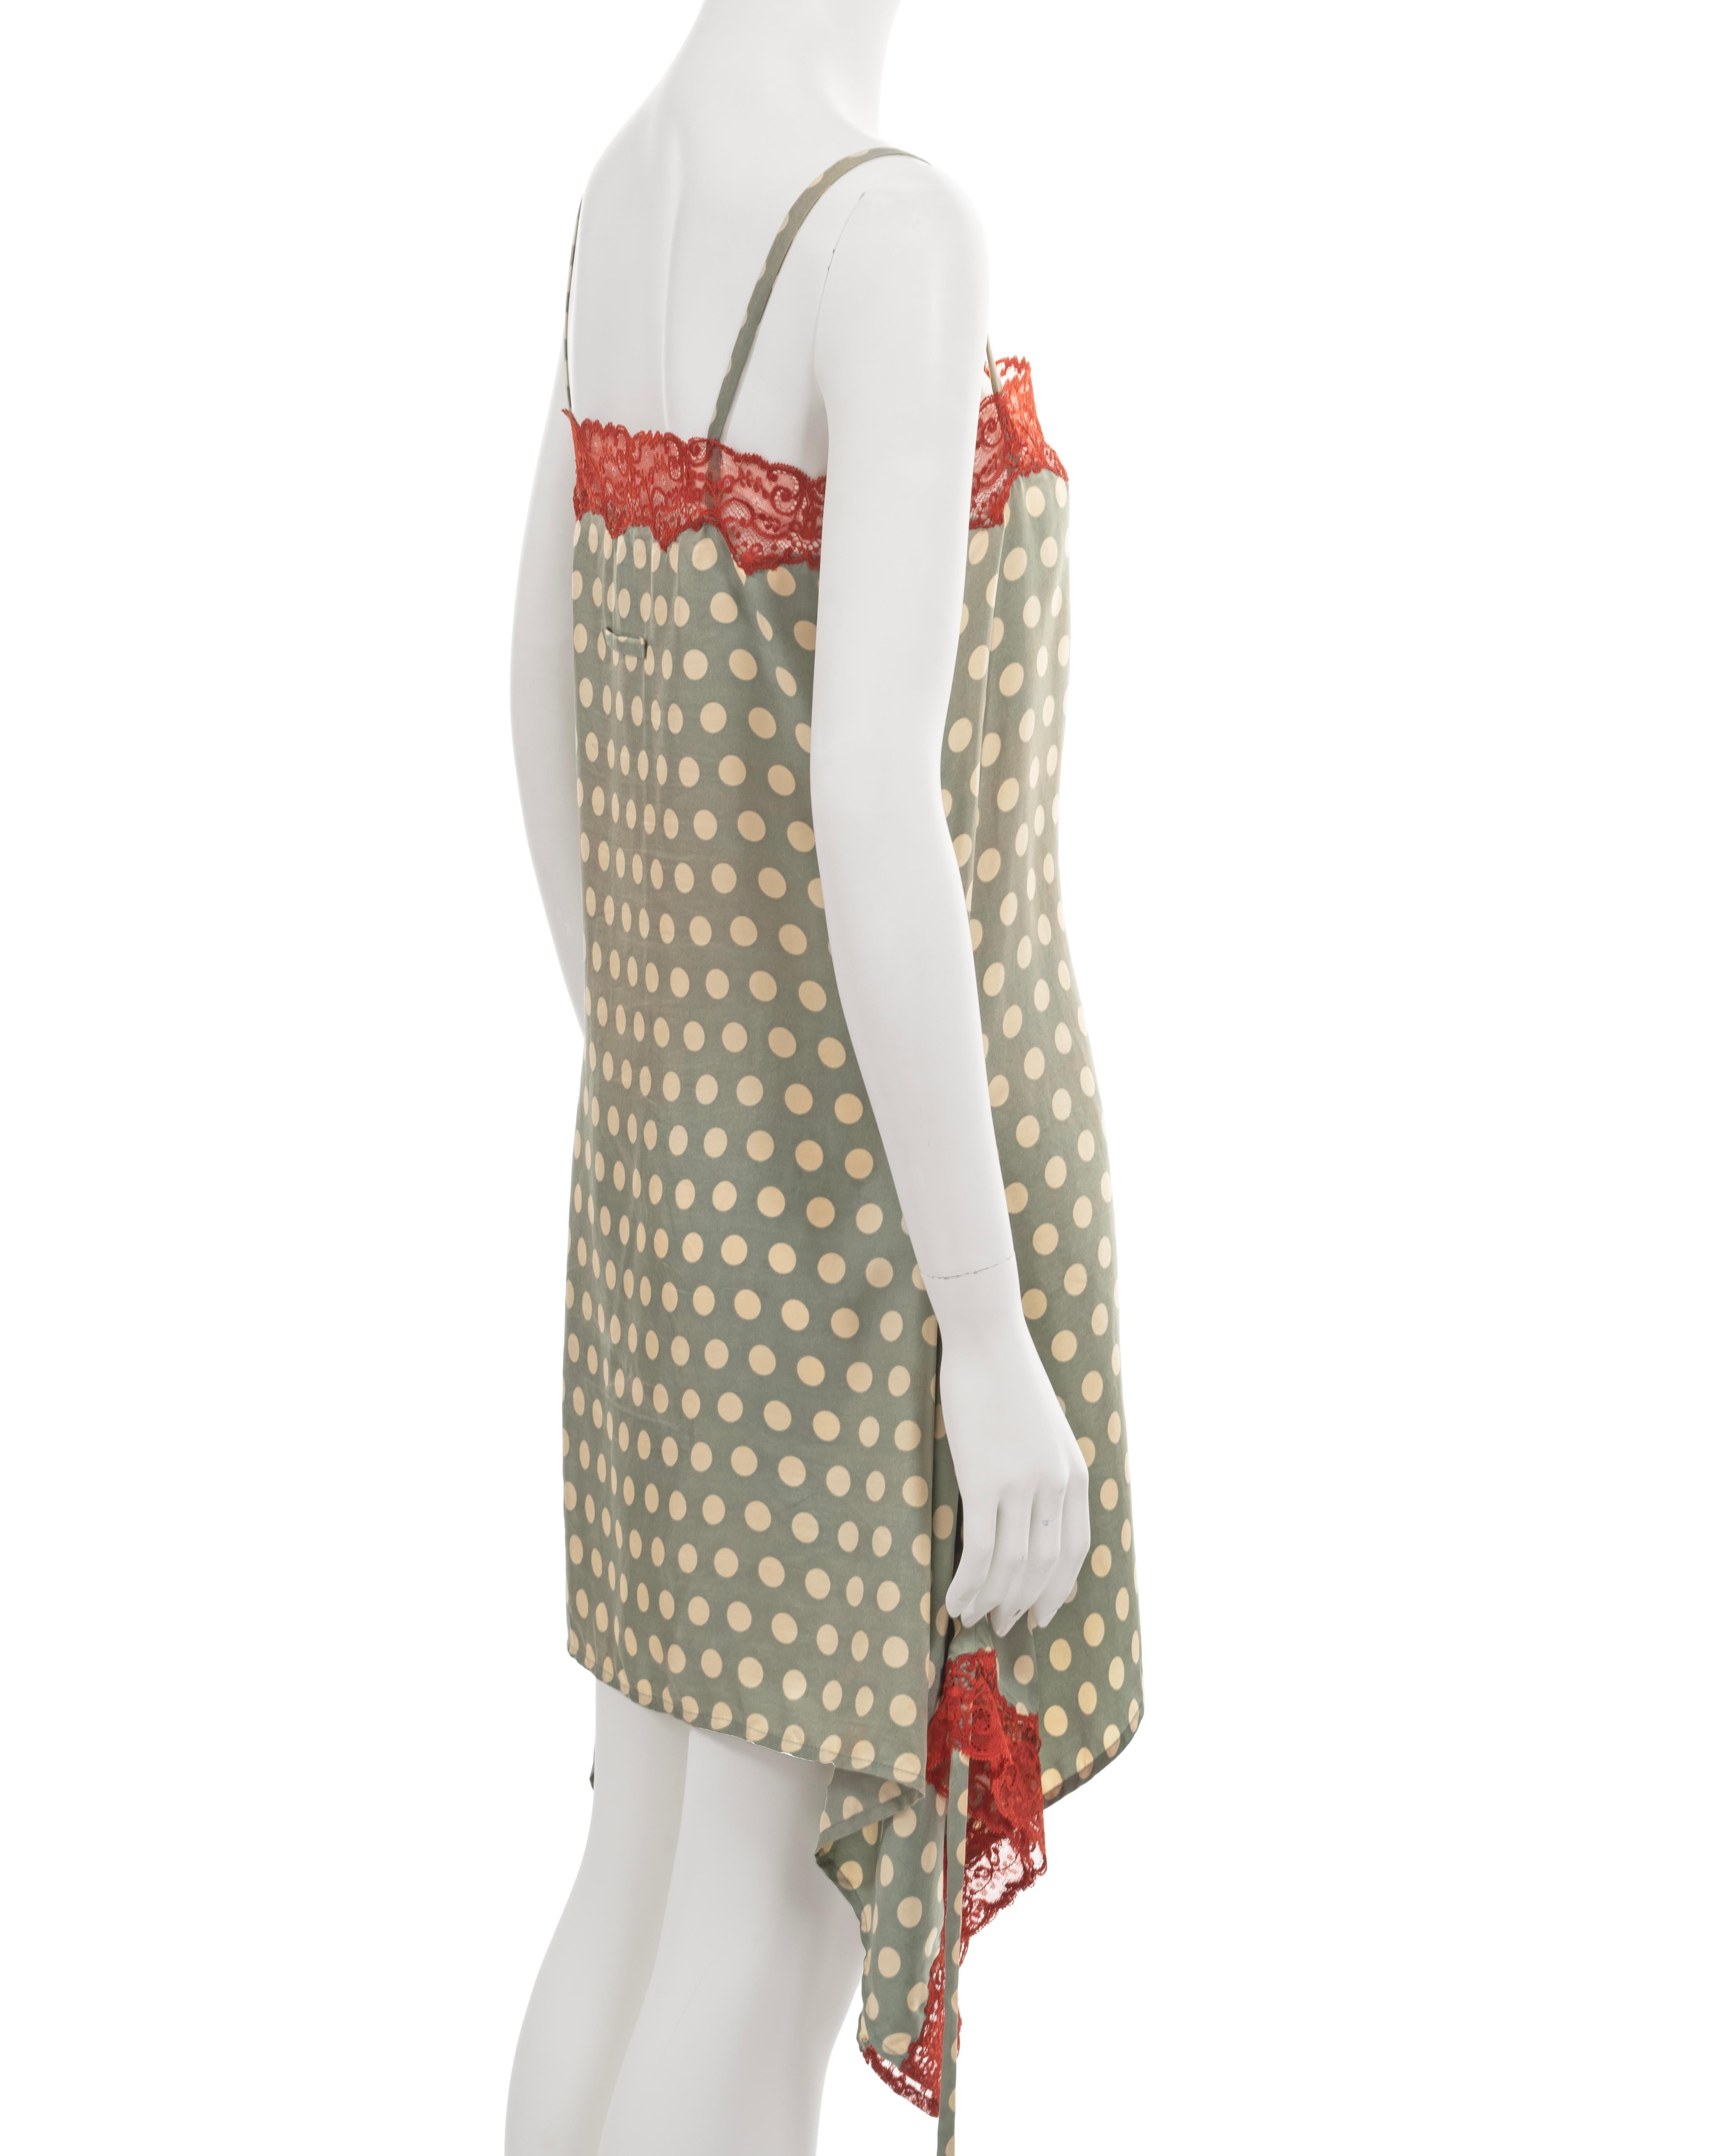 Jean Paul Gaultier green polkadot silk slip dress with red lace trim, ss 1992 For Sale 3